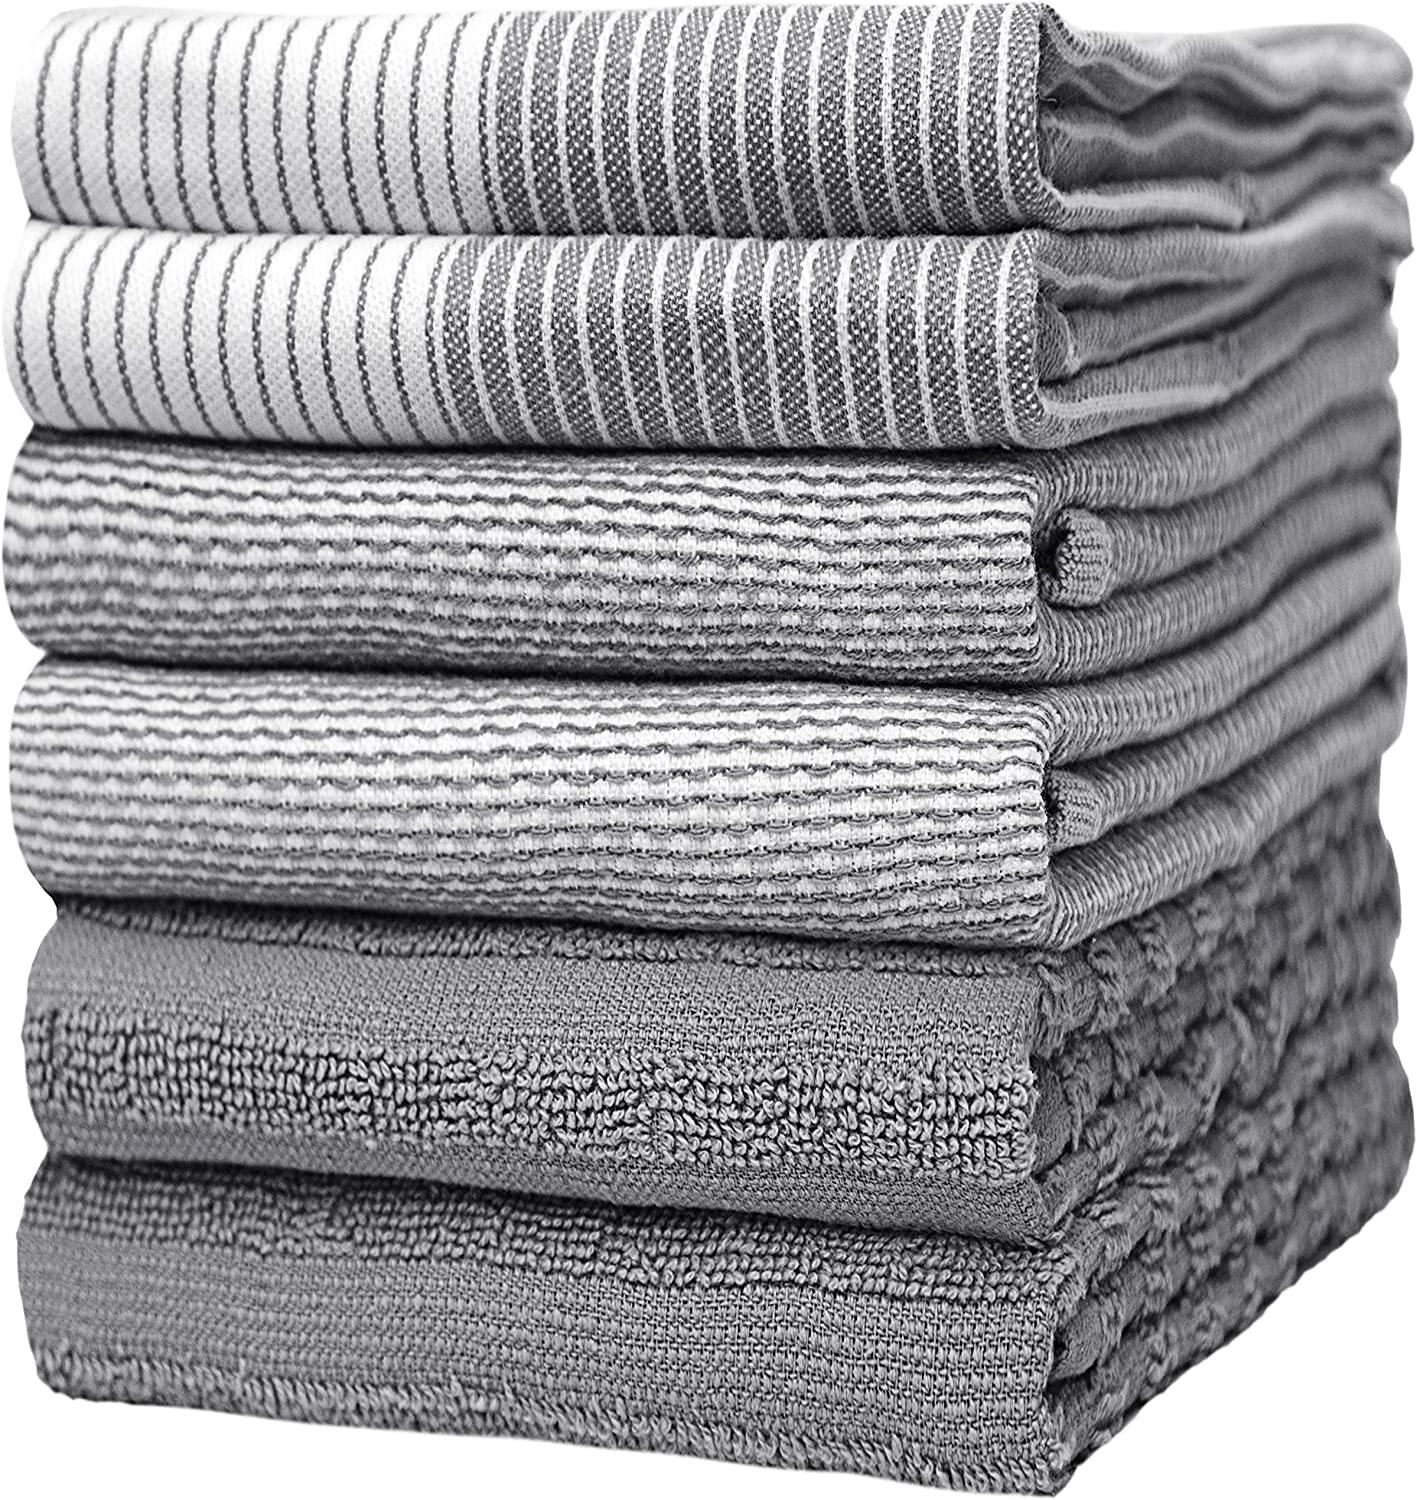 kimteny Stripe Kitchen Cloth Dish Towels, 13x28 Inches Premium Dishcloths,  Super Absorbent Coral Velvet Microfiber Cleaning Cloth, Fast Drying Rags